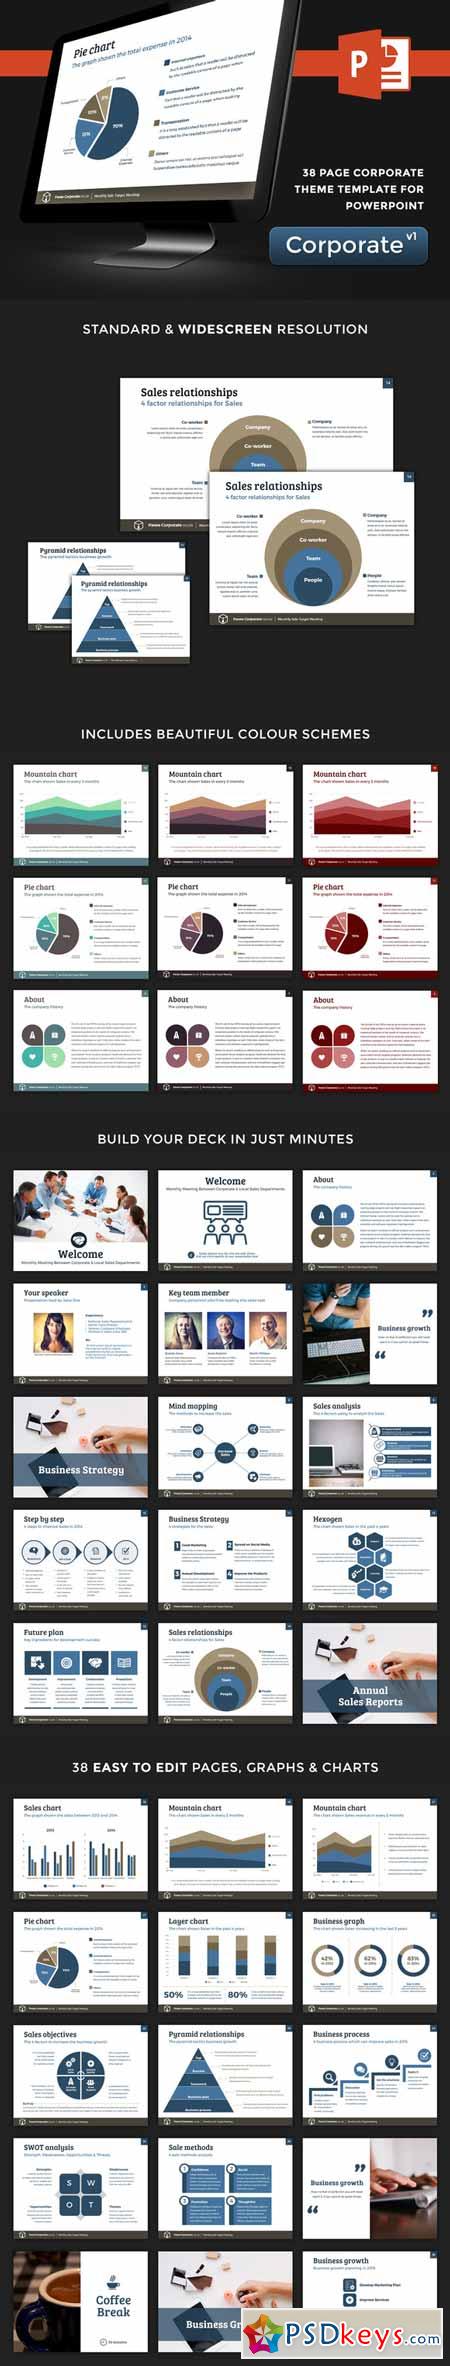 Corporate PowerPoint Template V.1 196723